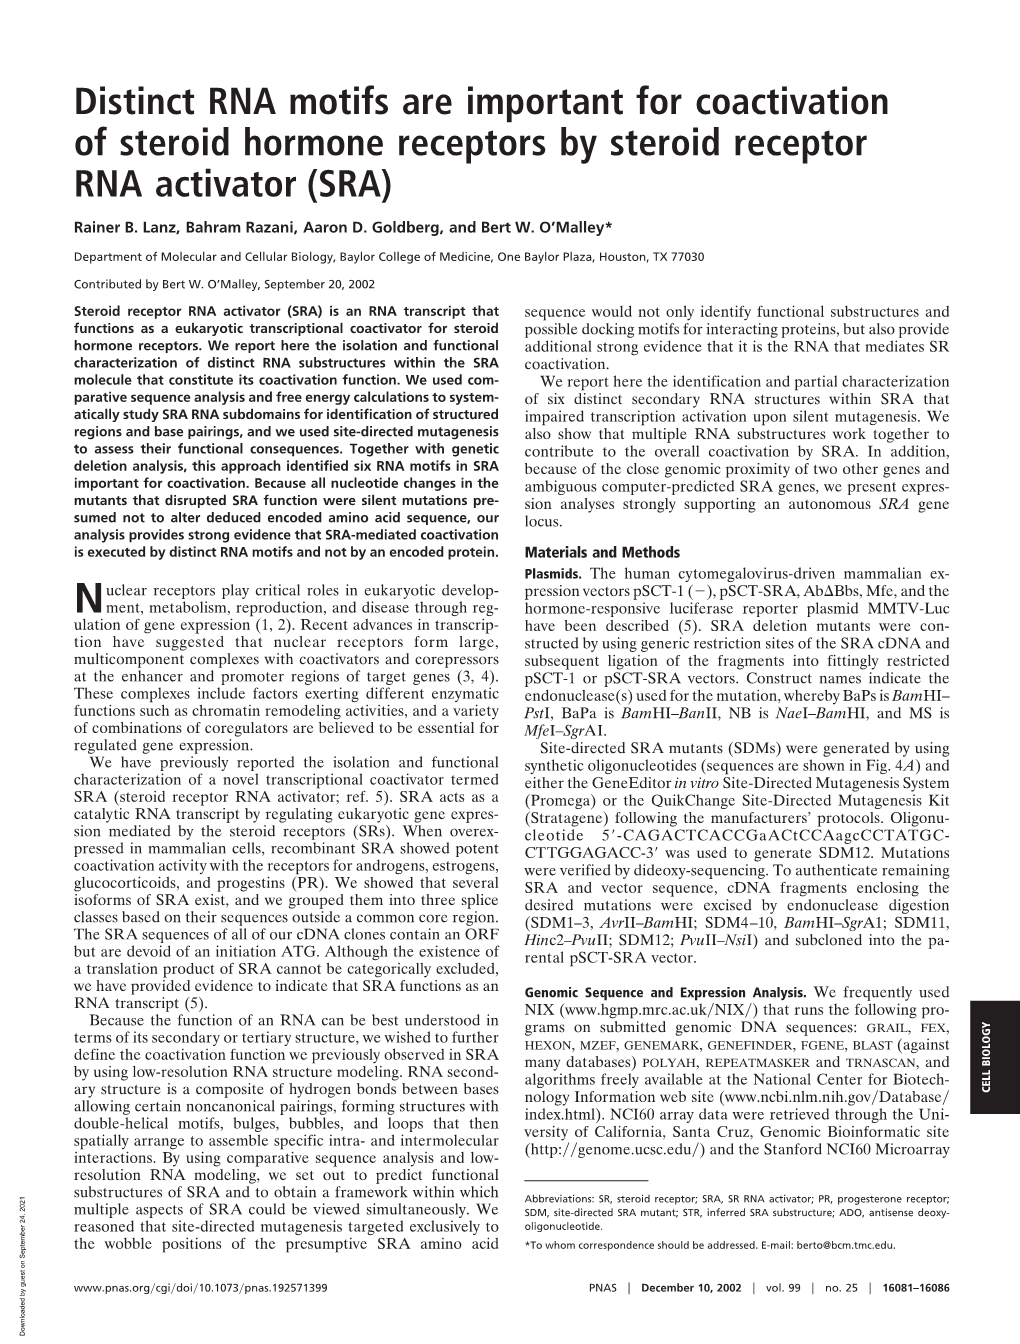 Distinct RNA Motifs Are Important for Coactivation of Steroid Hormone Receptors by Steroid Receptor RNA Activator (SRA)